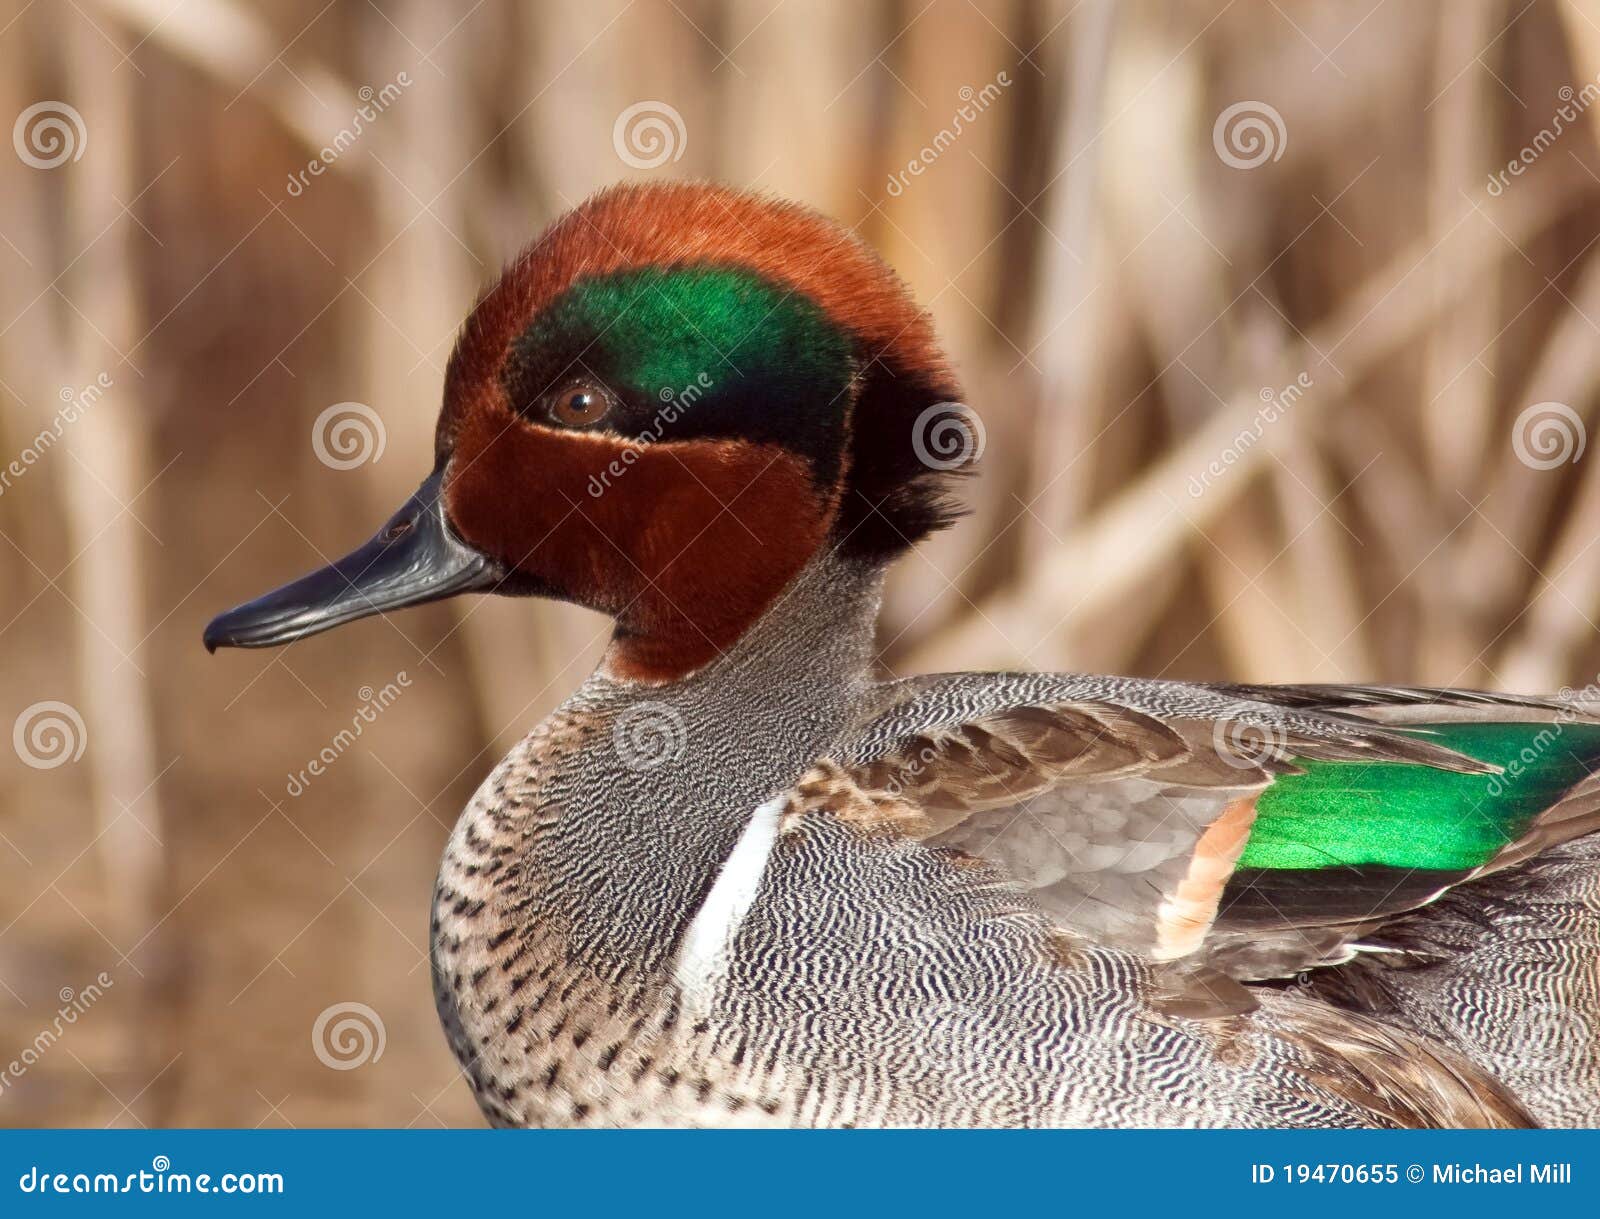 green winged teal close-up